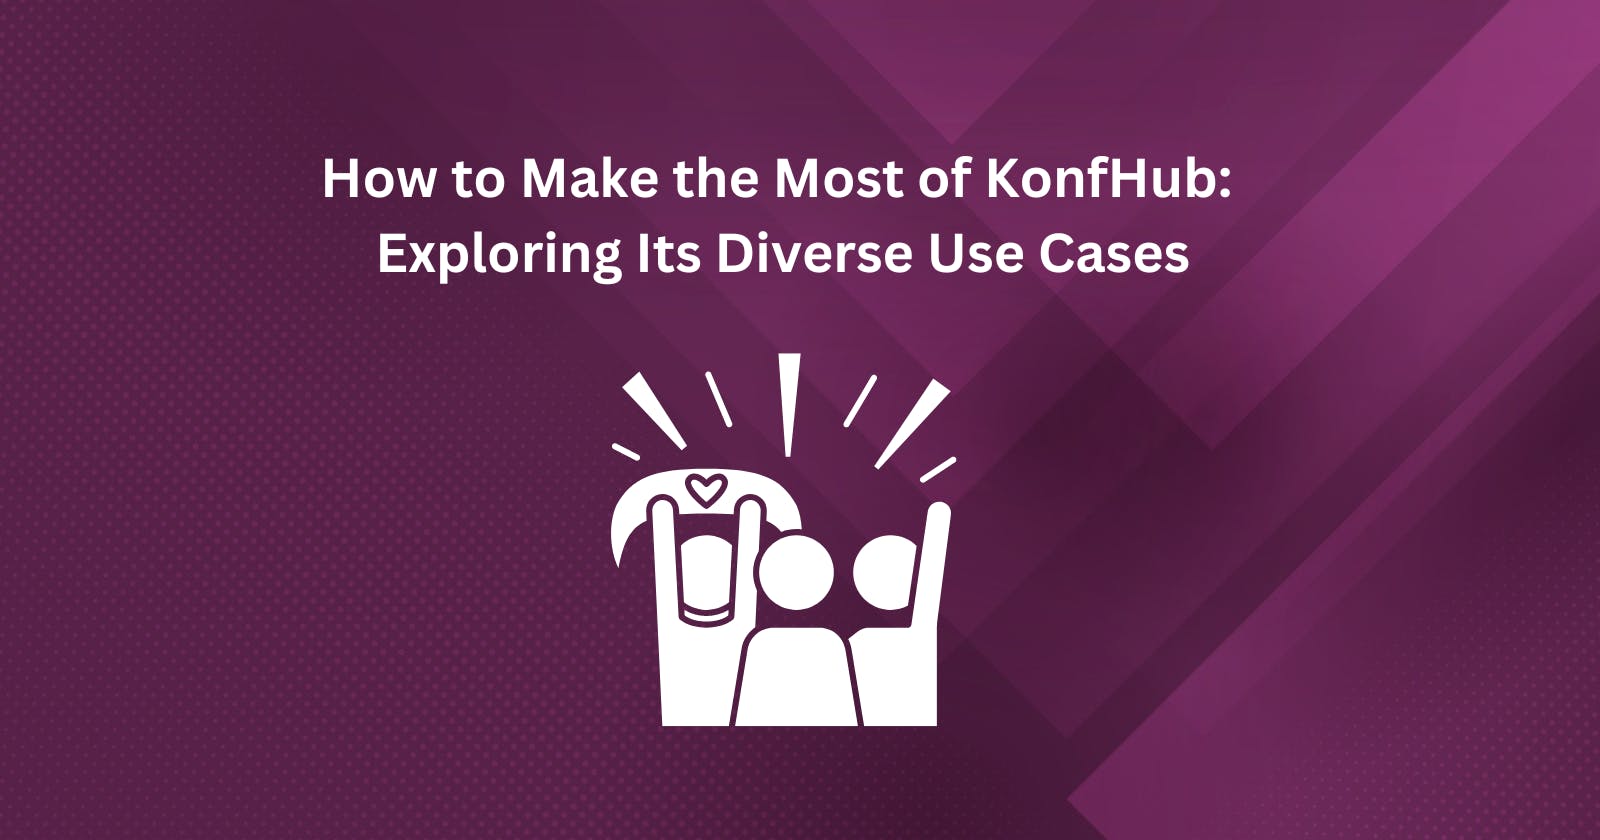 How to Make the Most of KonfHub: Exploring Its Diverse Use Cases